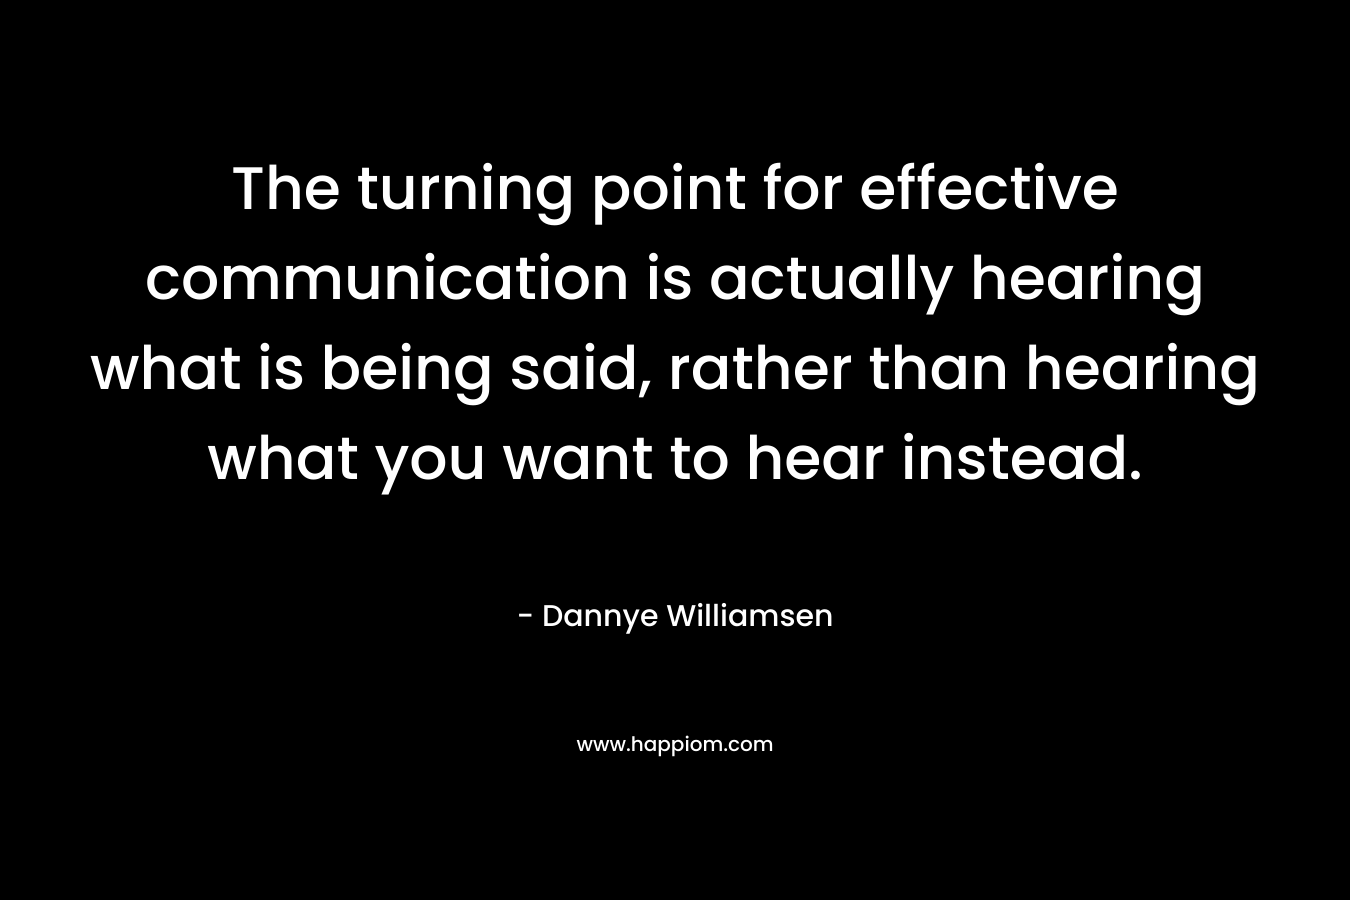 The turning point for effective communication is actually hearing what is being said, rather than hearing what you want to hear instead. – Dannye Williamsen